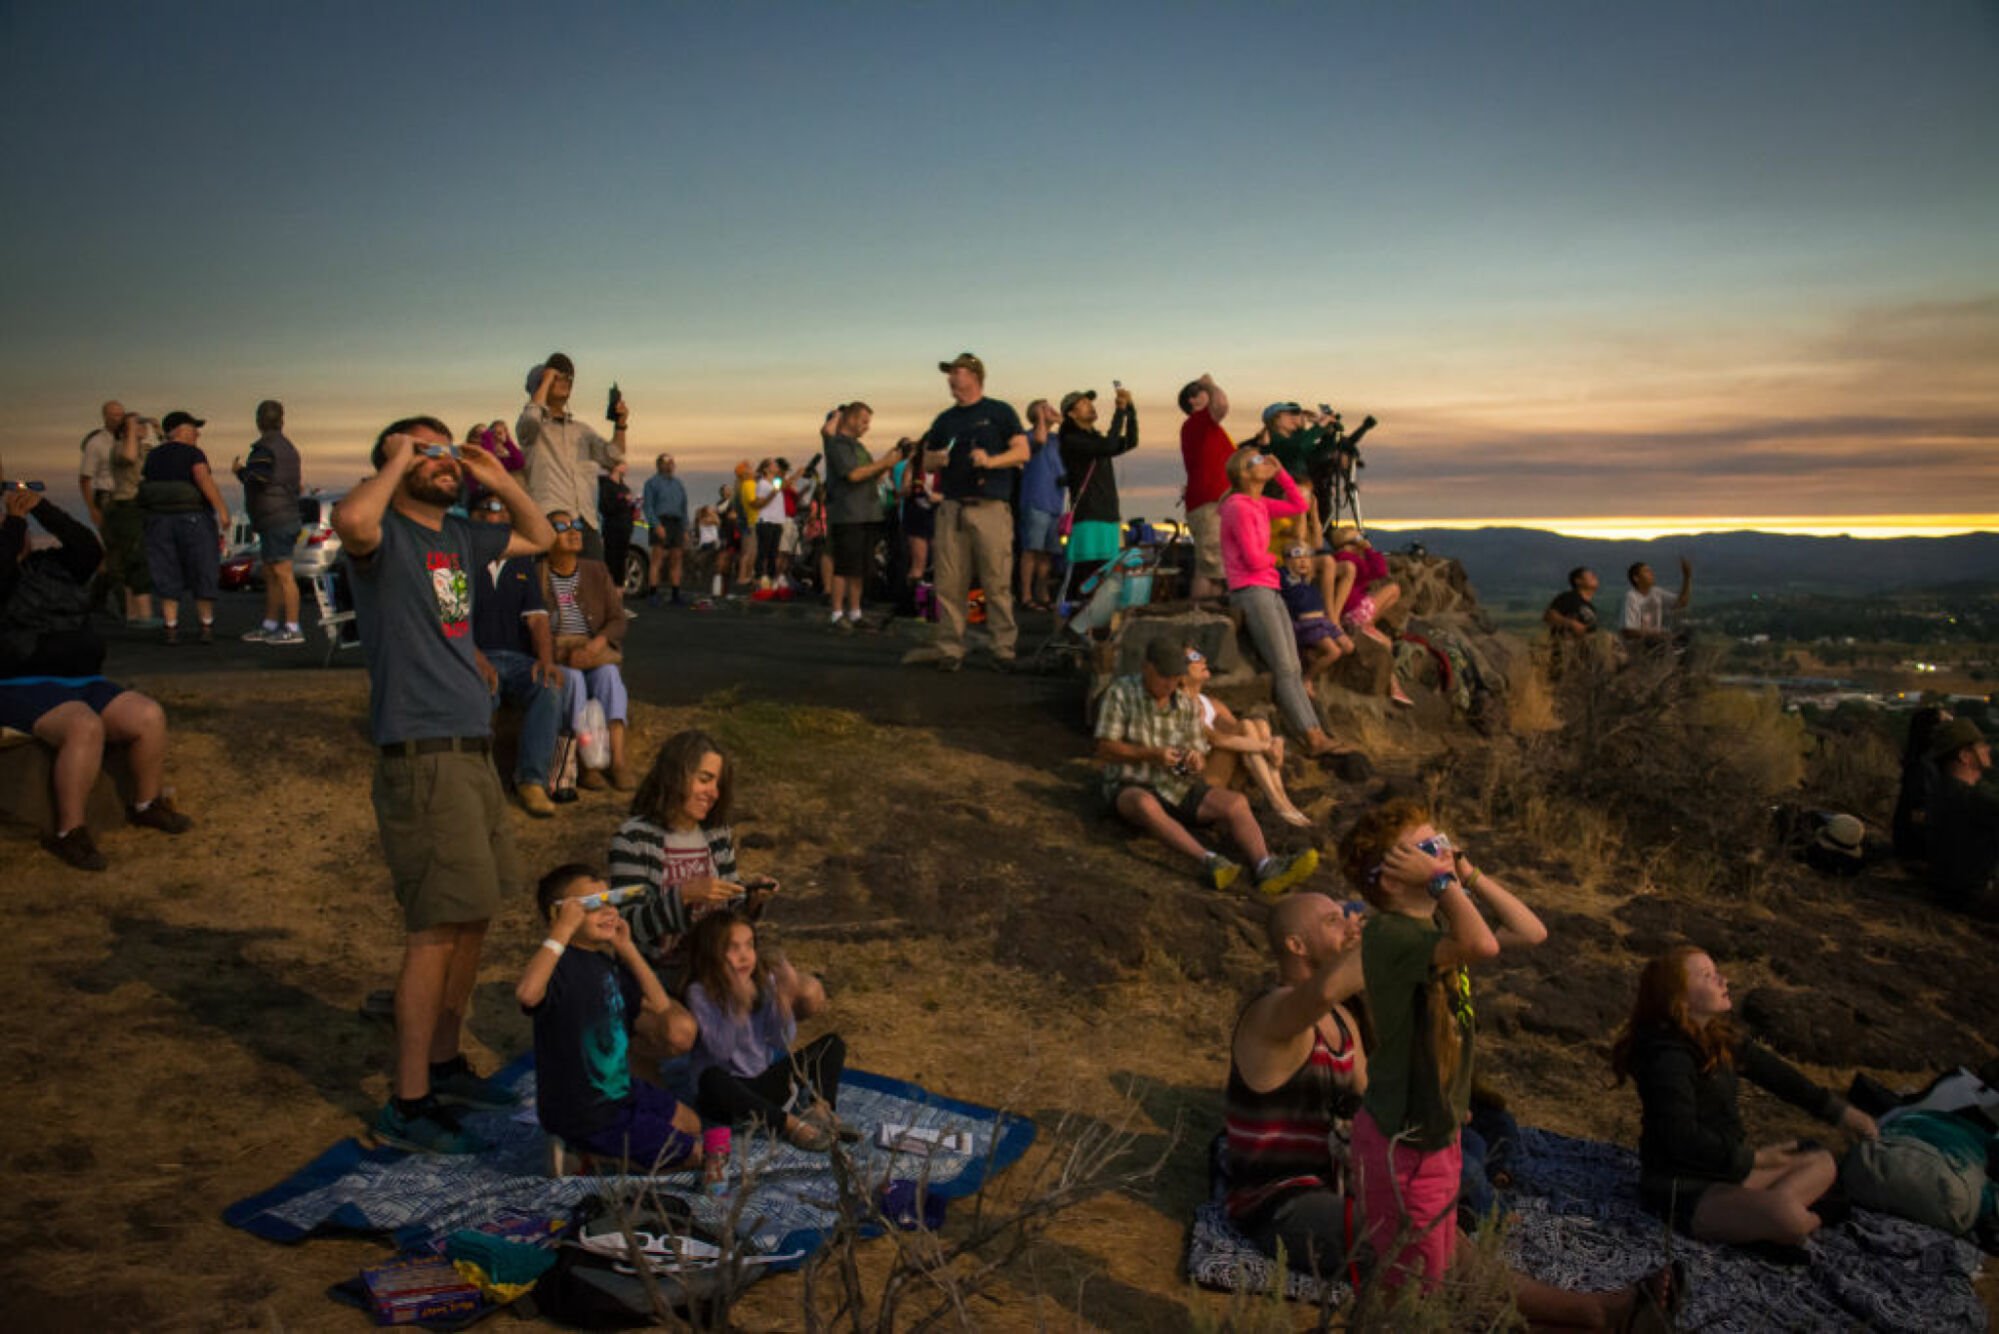 Crowds watching a total solar eclipse in Oregon in August 2017